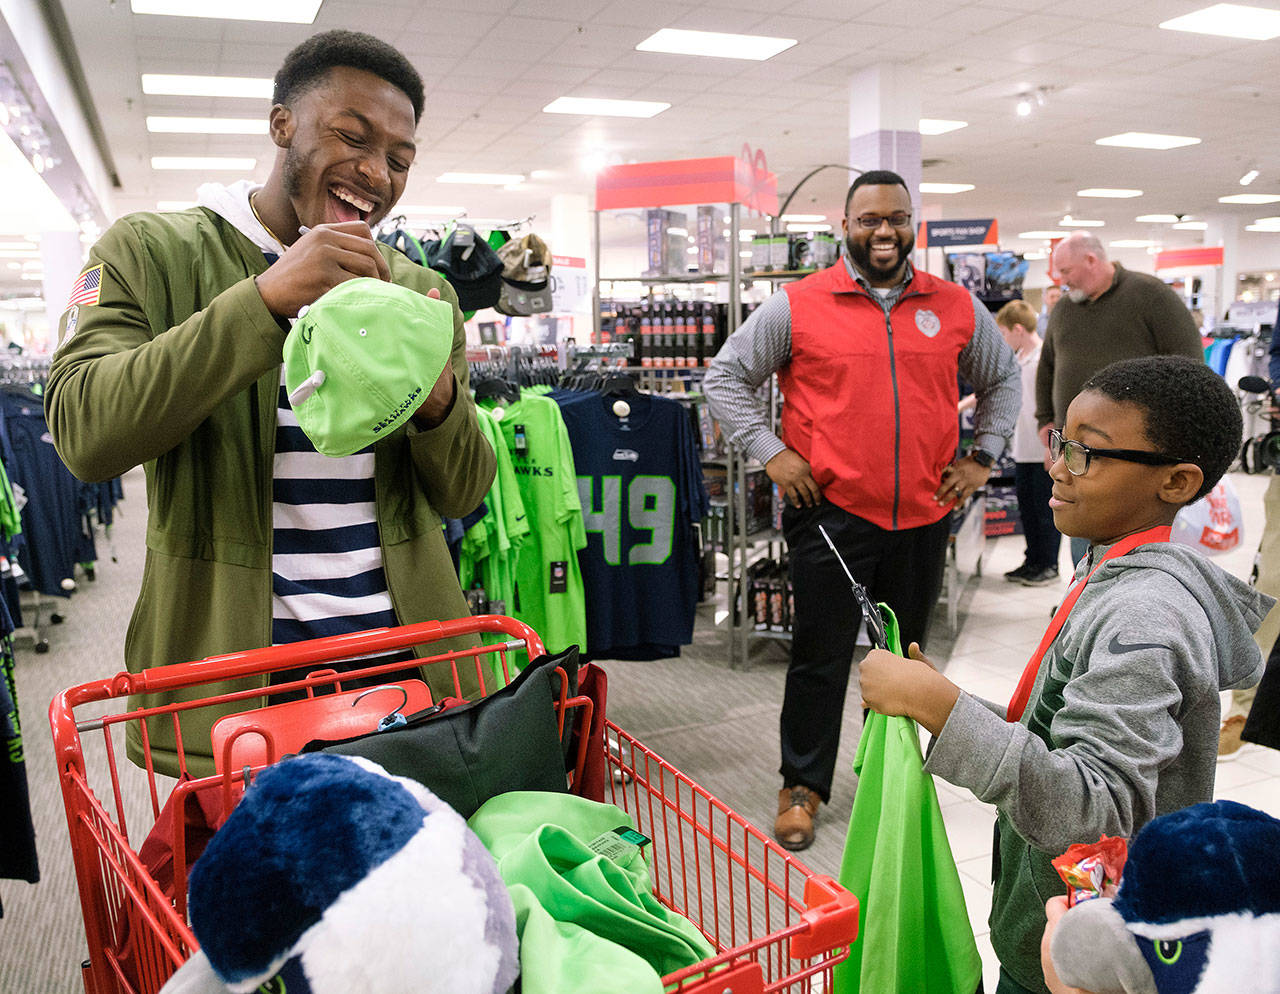 Seattle Seahawks wide receiver David Moore autographs a hat for a kid from the Auburn Valley YMCA after-school program during the JCPenney Giving Spree on Tuesday, Dec. 11 in Tukwila. In its fifth year, JCPenney is giving more than 1,200 kids a one-of-a-kind shopping experience. Stephen Brashear/AP Images for JCPenney